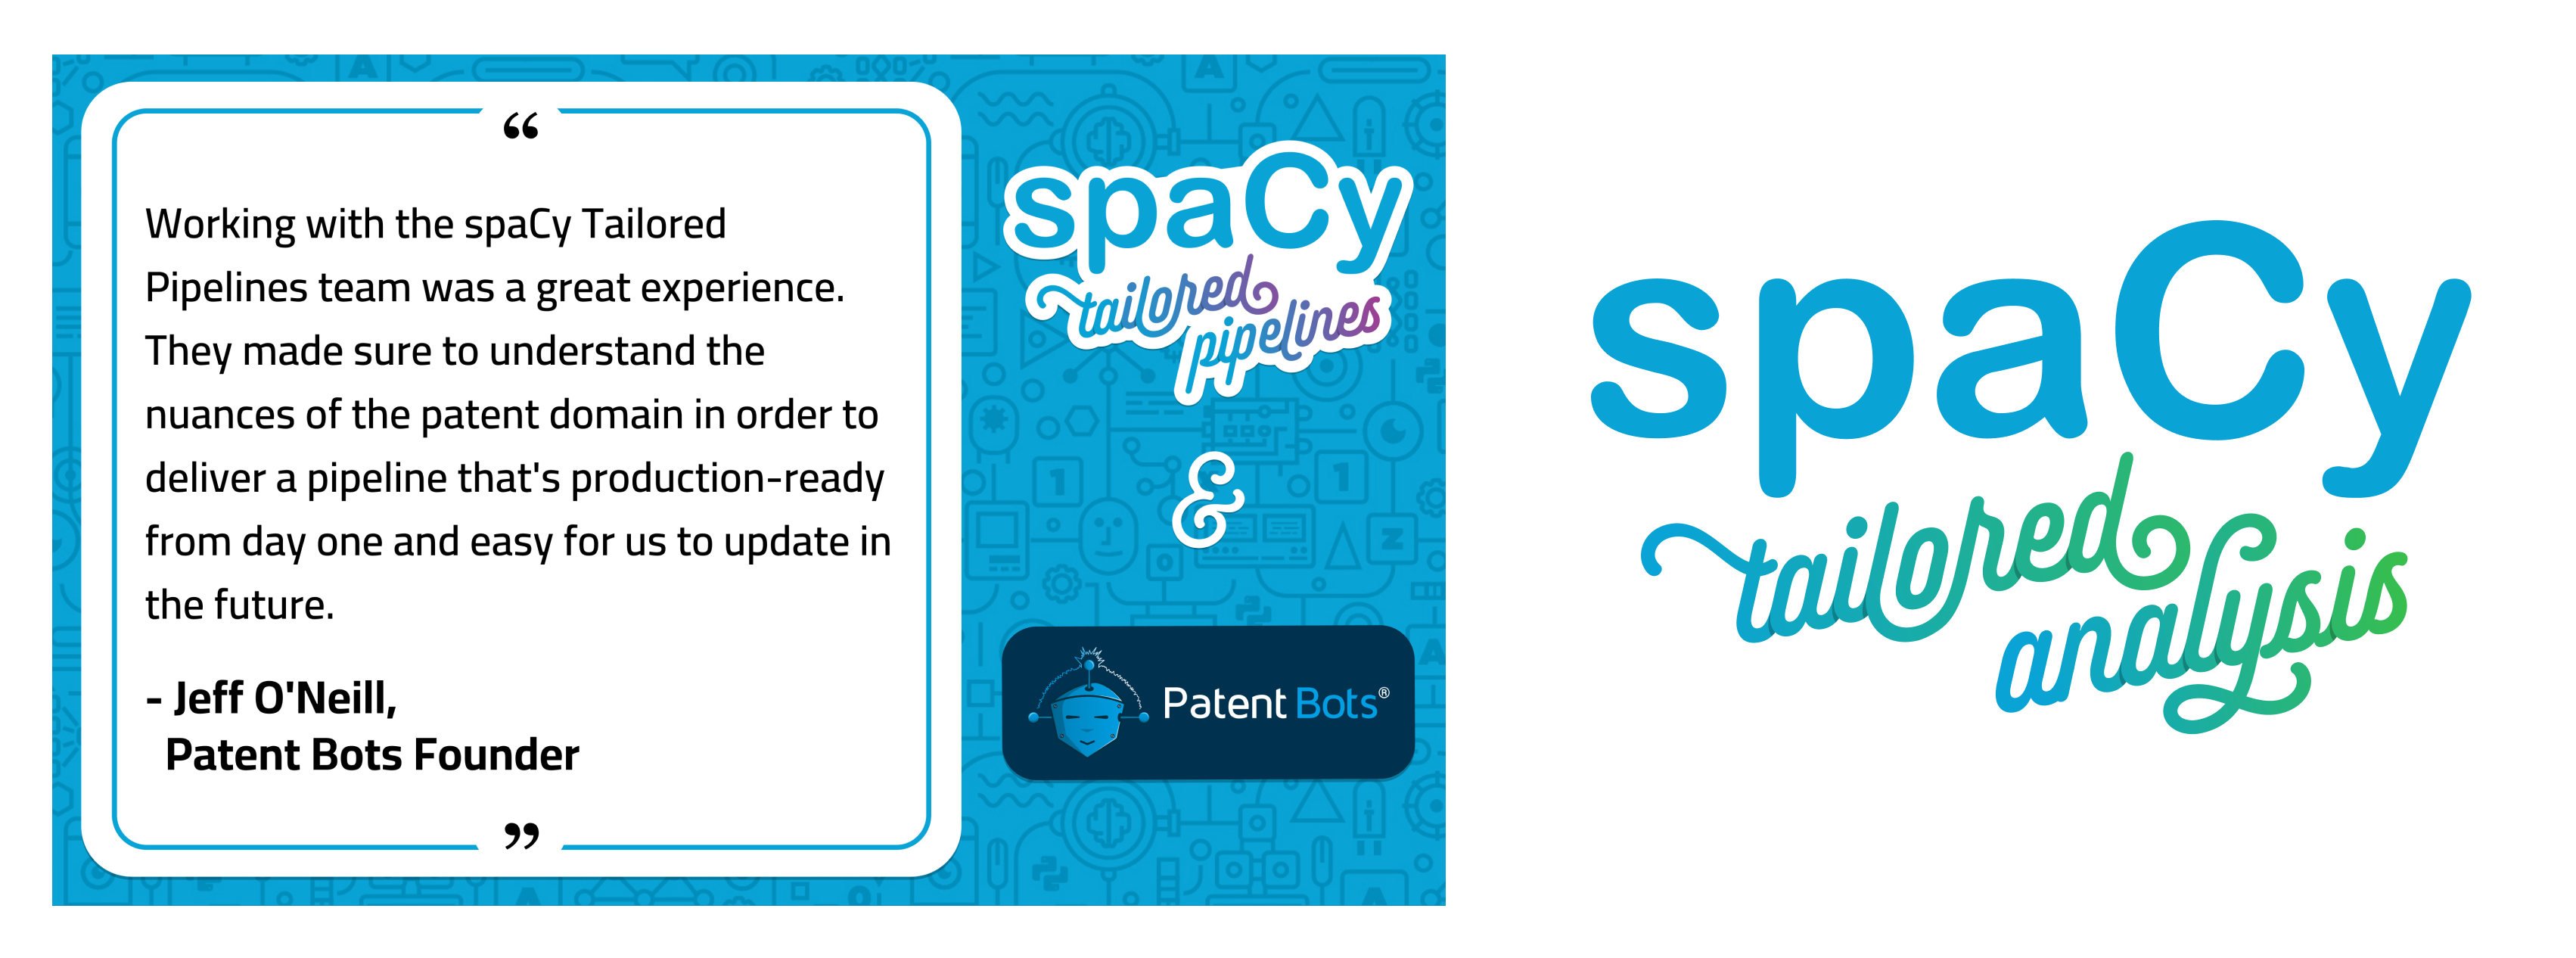 spaCy tailored pipelines and spaCy tailored analysis